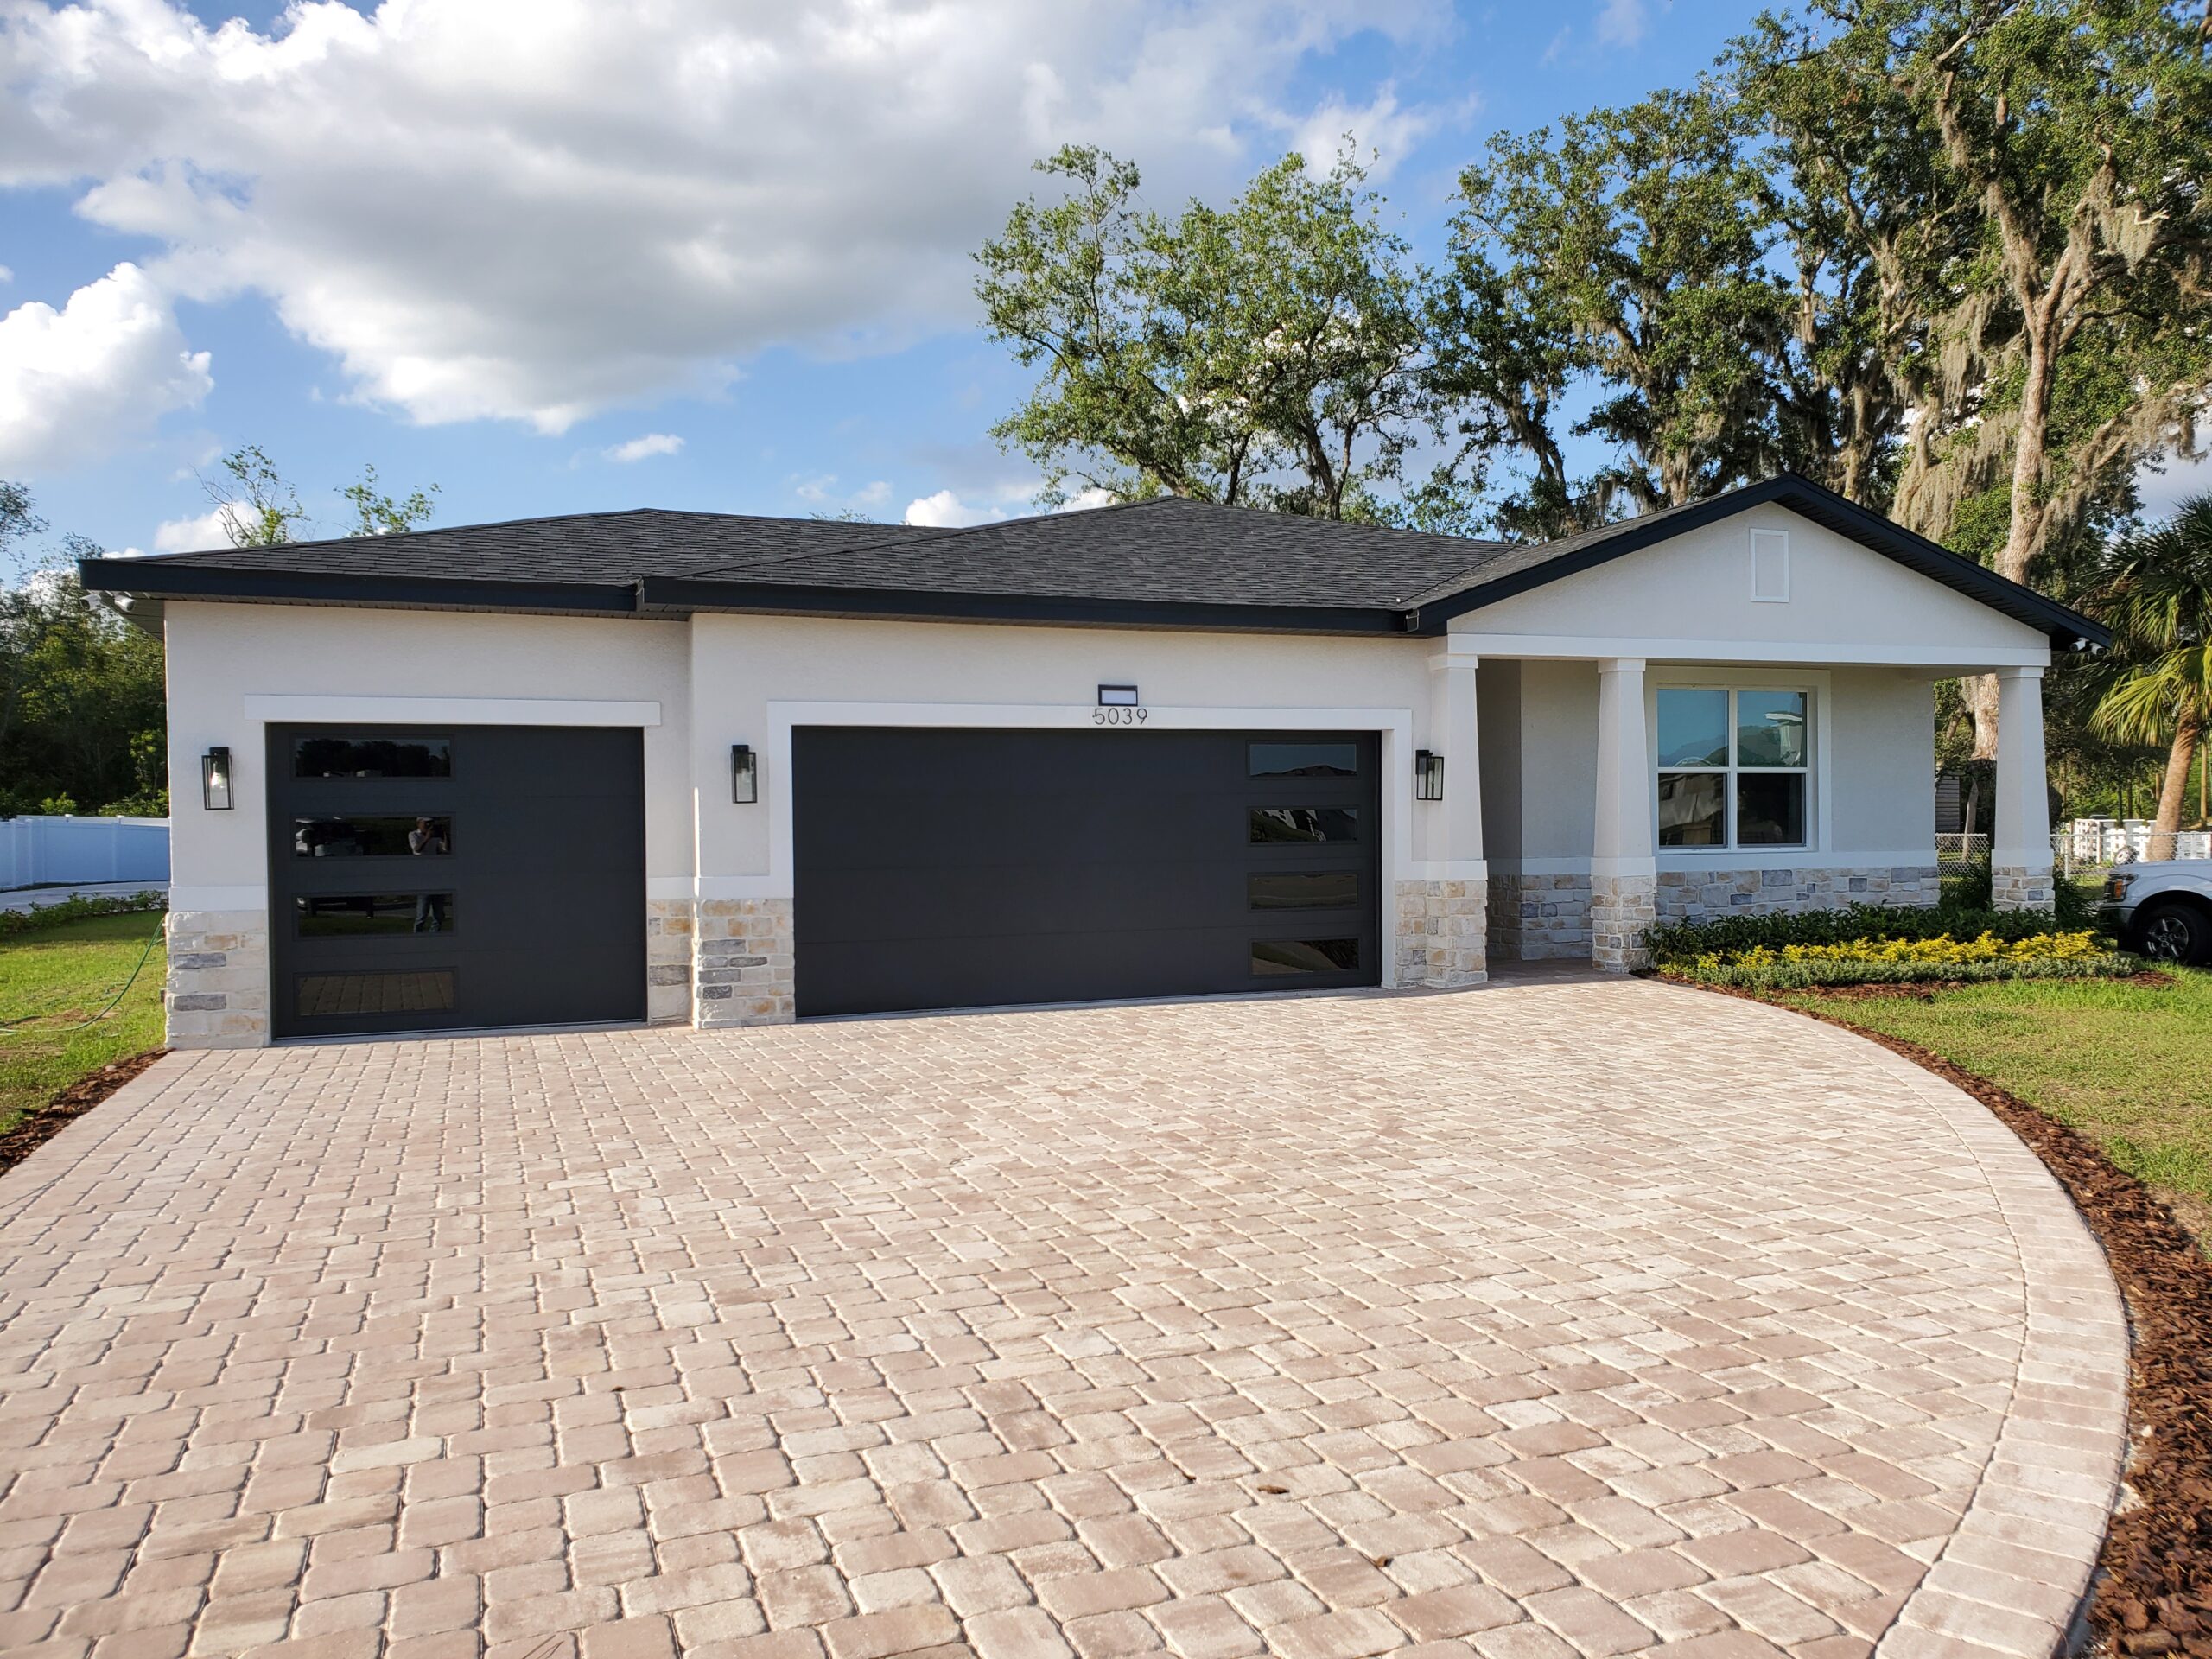 Home Construction - New Homes Innovation Group - Kissimmee, FL